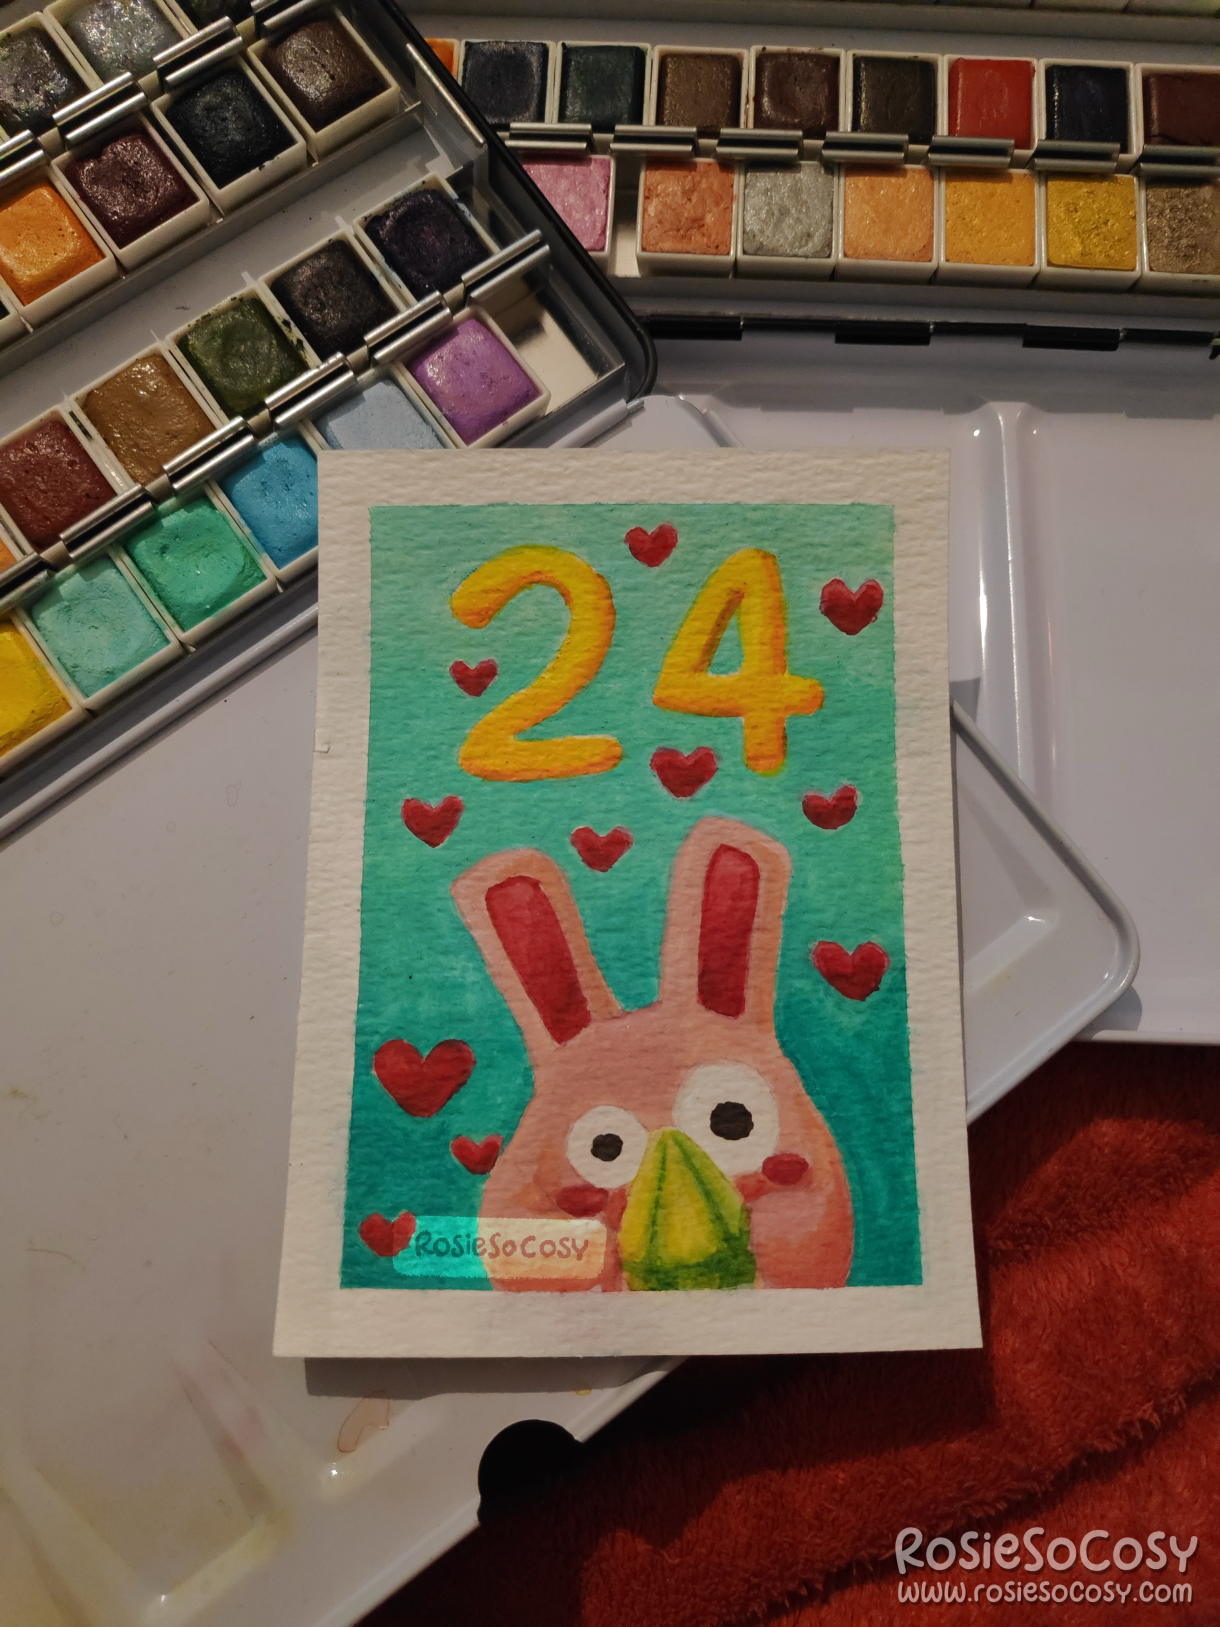 Watercolour illustration of a cute pink Freezer Bunny, holding a green plumbob, surrounded by red hearts, on a turquoise and teal gradient background, with the number 24 above it in yellow.